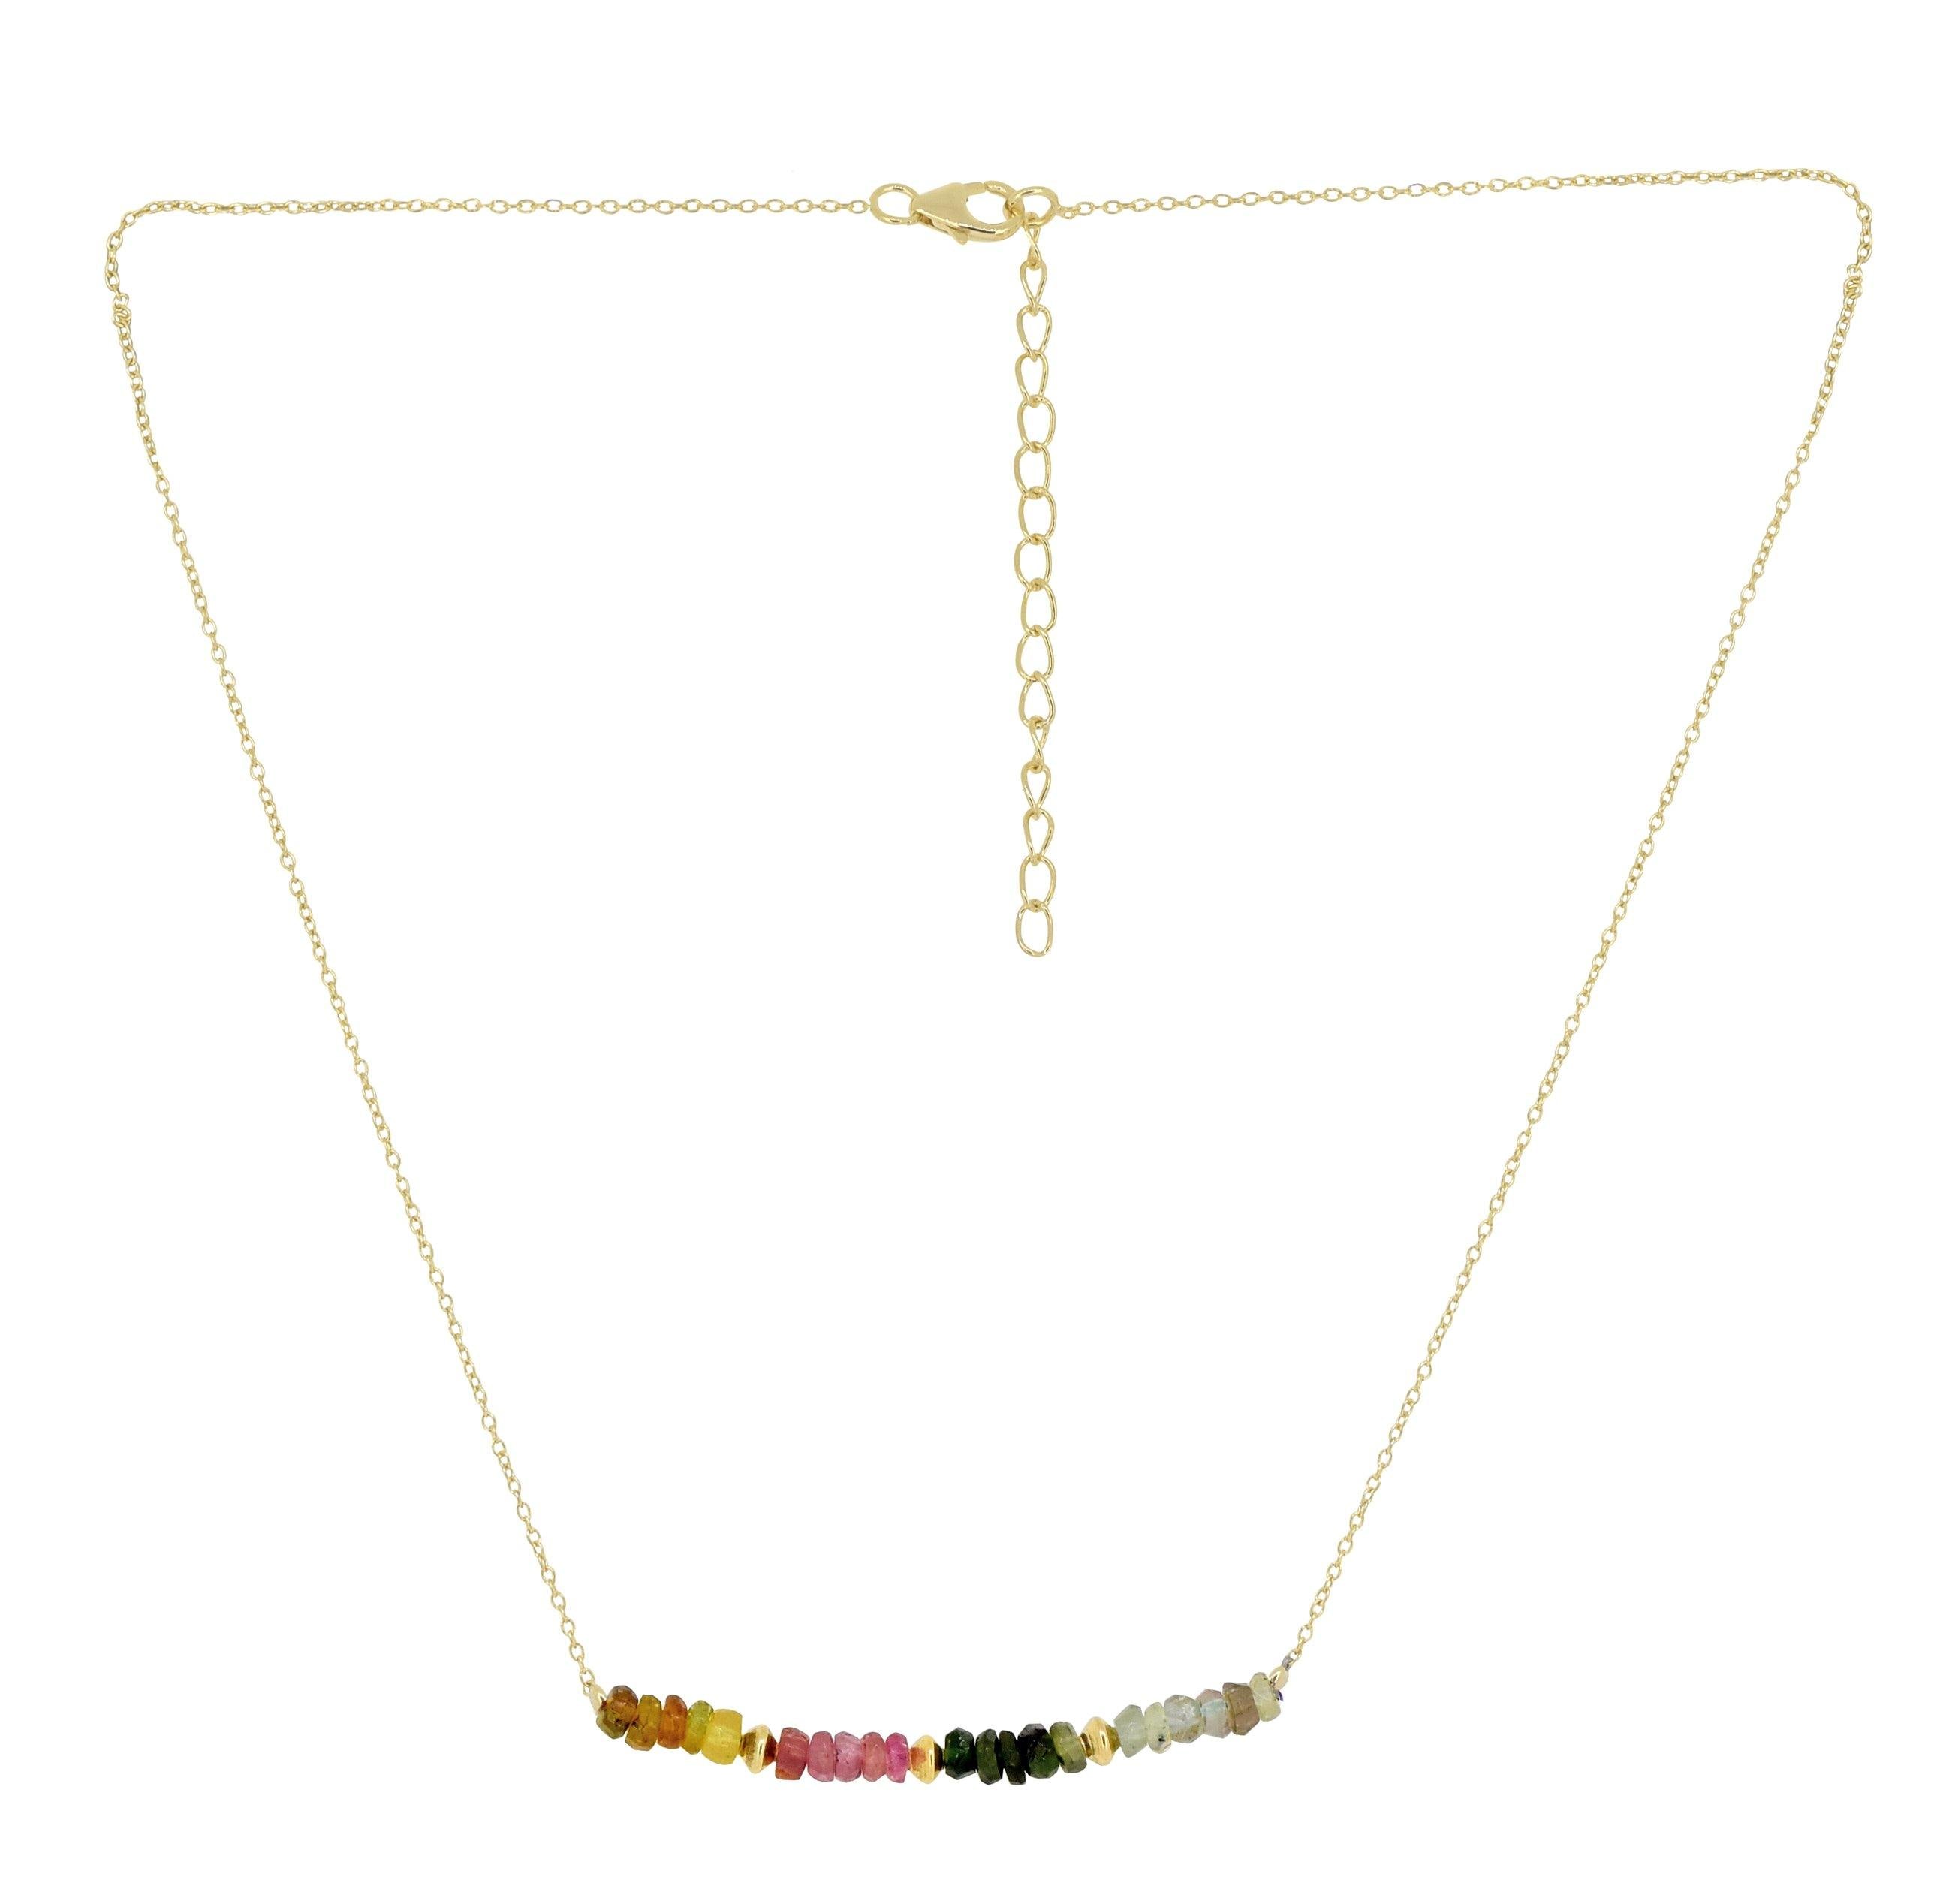 Multi Tourmaline Solid 925 Sterling Silver Gold Plated Chain Pendant Necklace Jewelry - YoTreasure